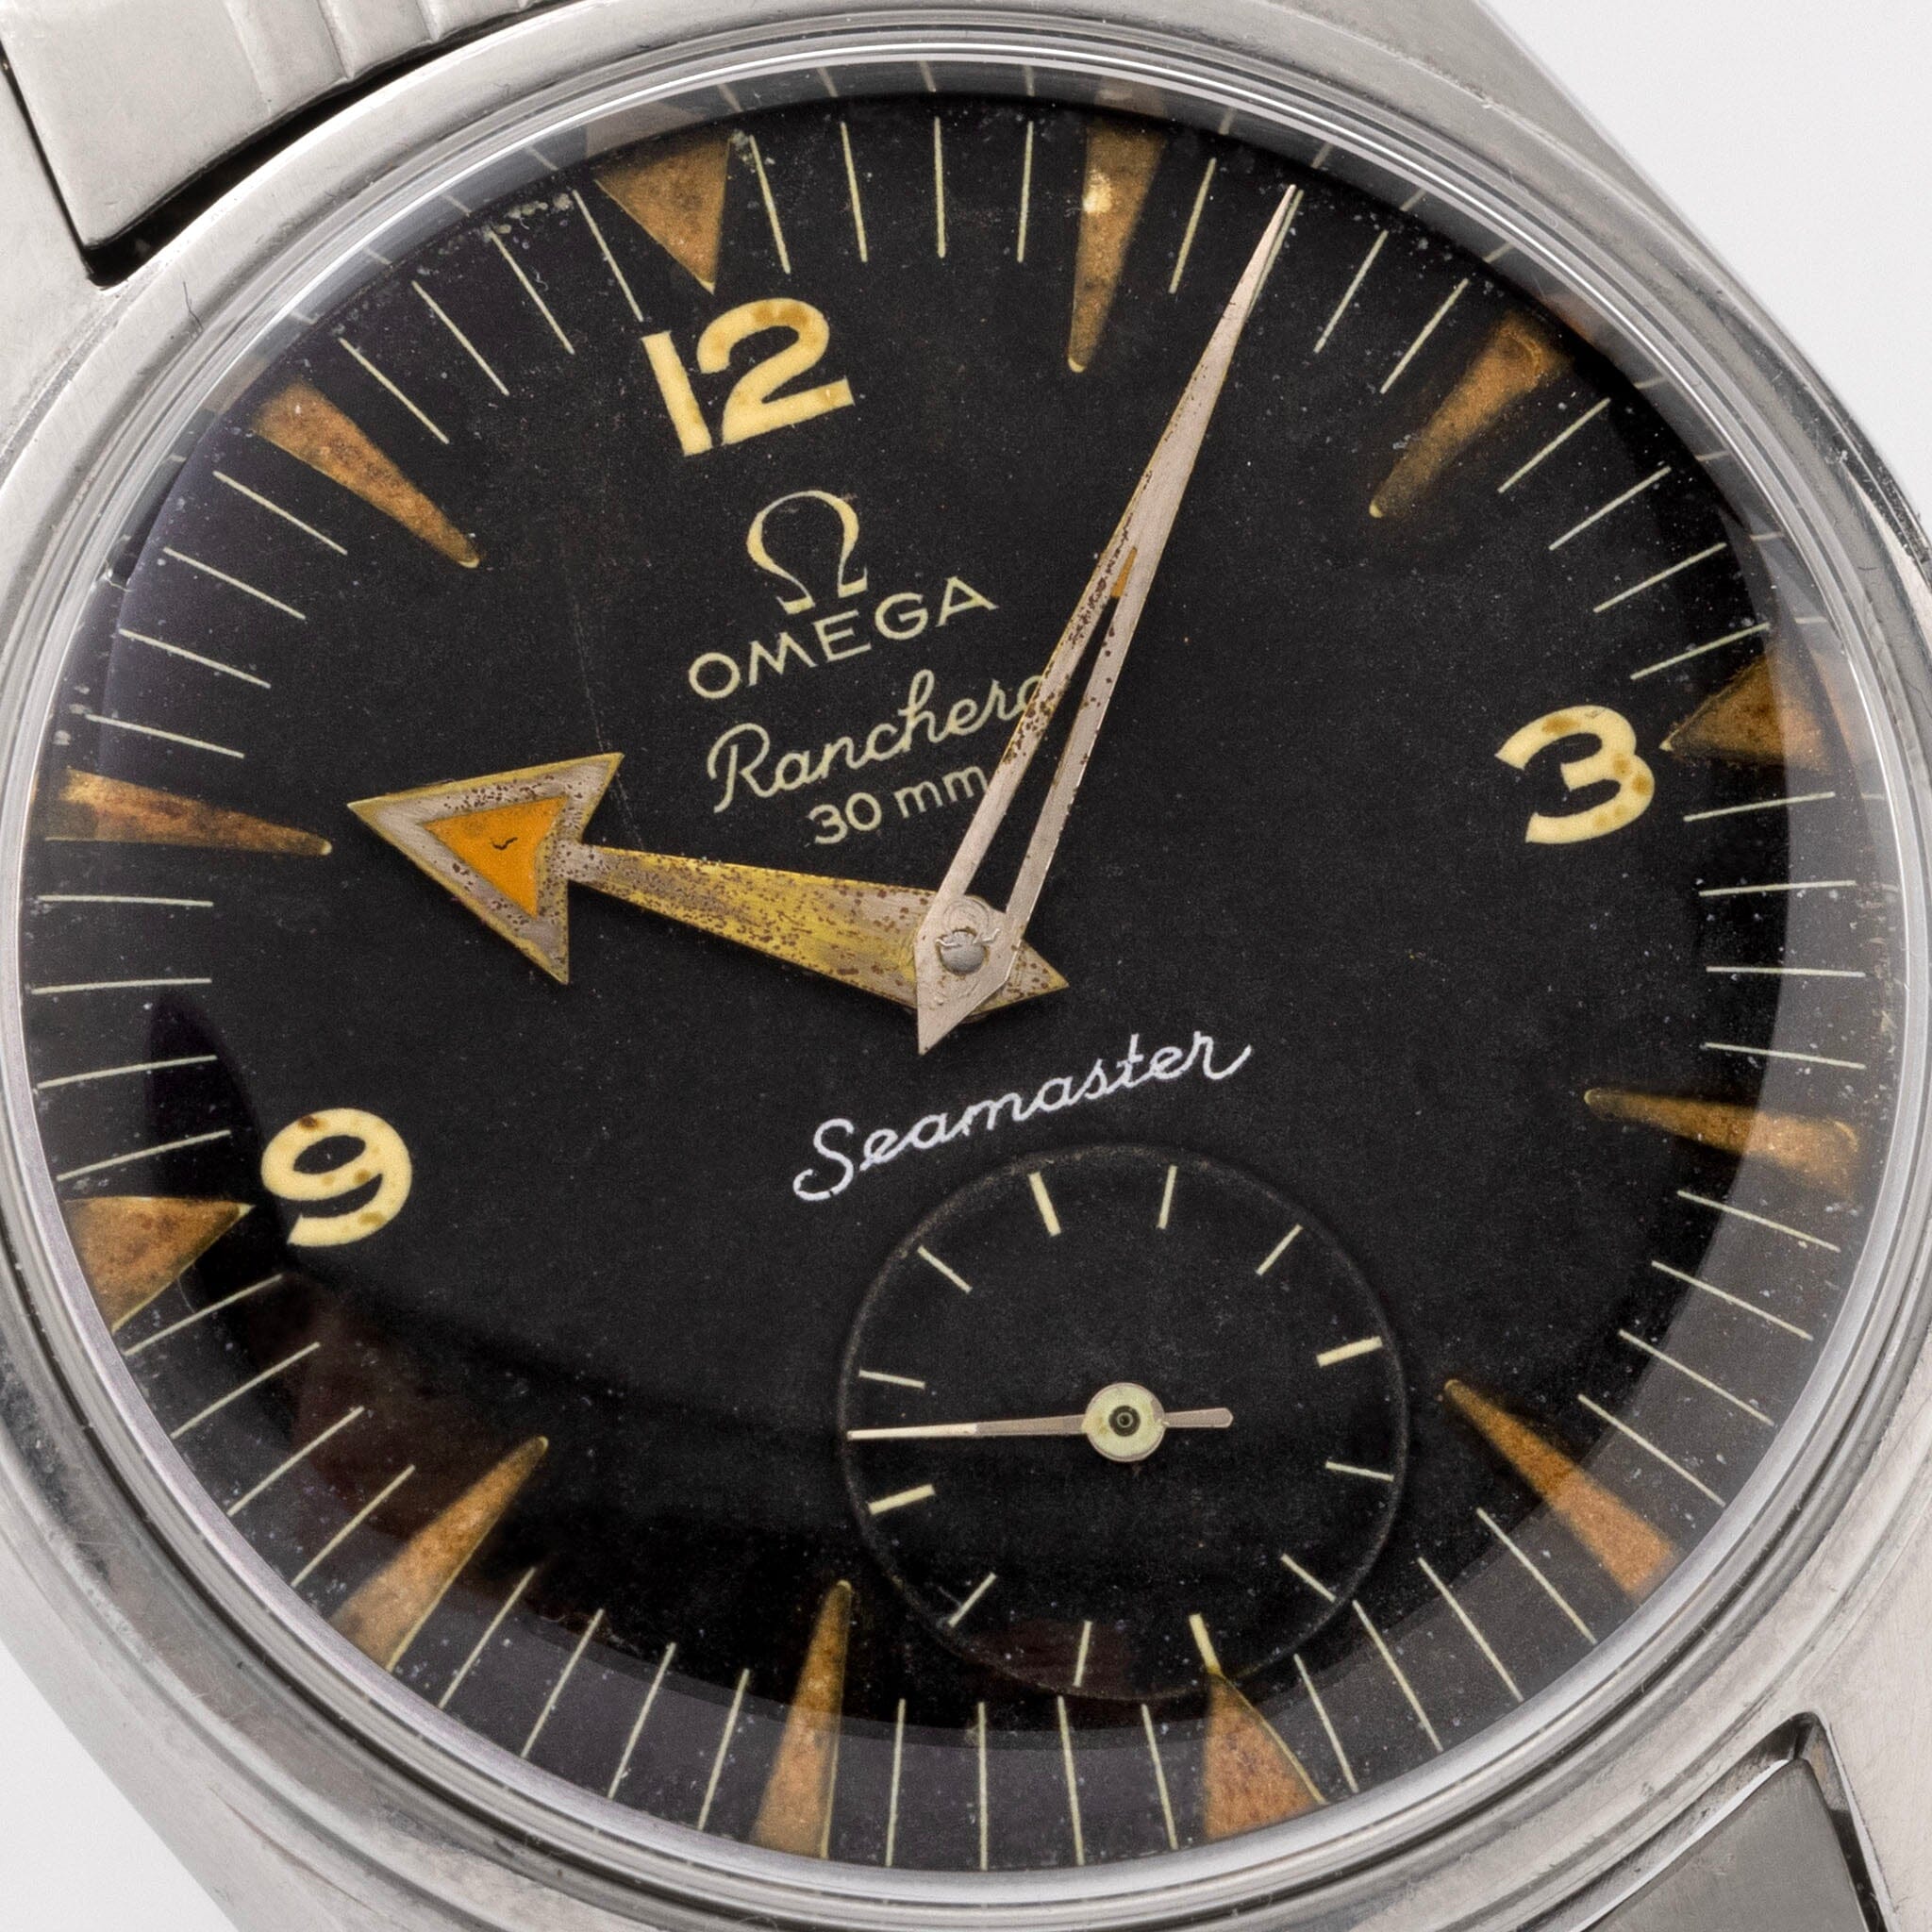 Omega Ranchero Seamaster Issued to the Fuerza Aérea Peru ref CK2990